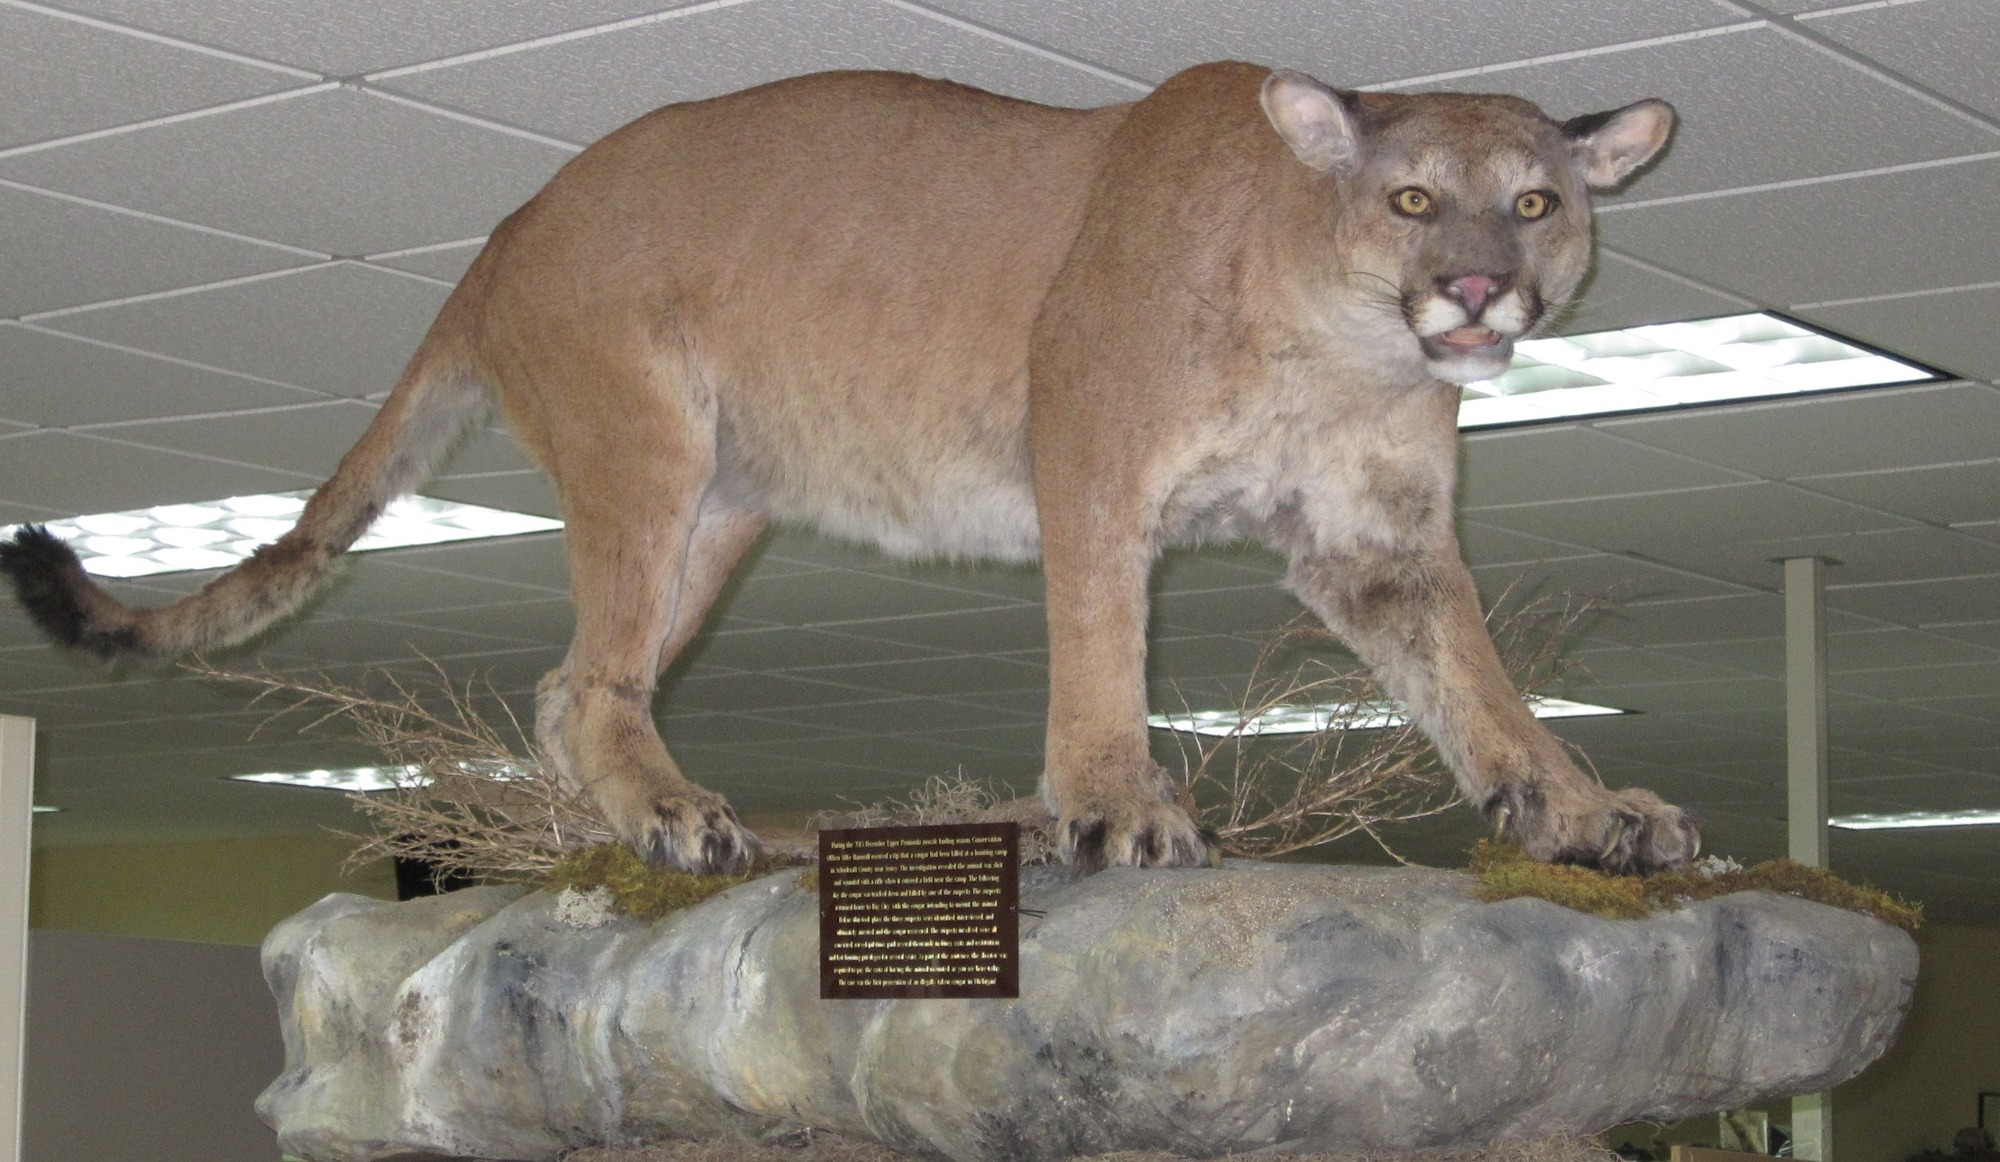 The cougar shown was poached in Schoolcraft County in 2013. This is one of two male cougars the Michigan DNR sampled tissue from for genetic analysis.